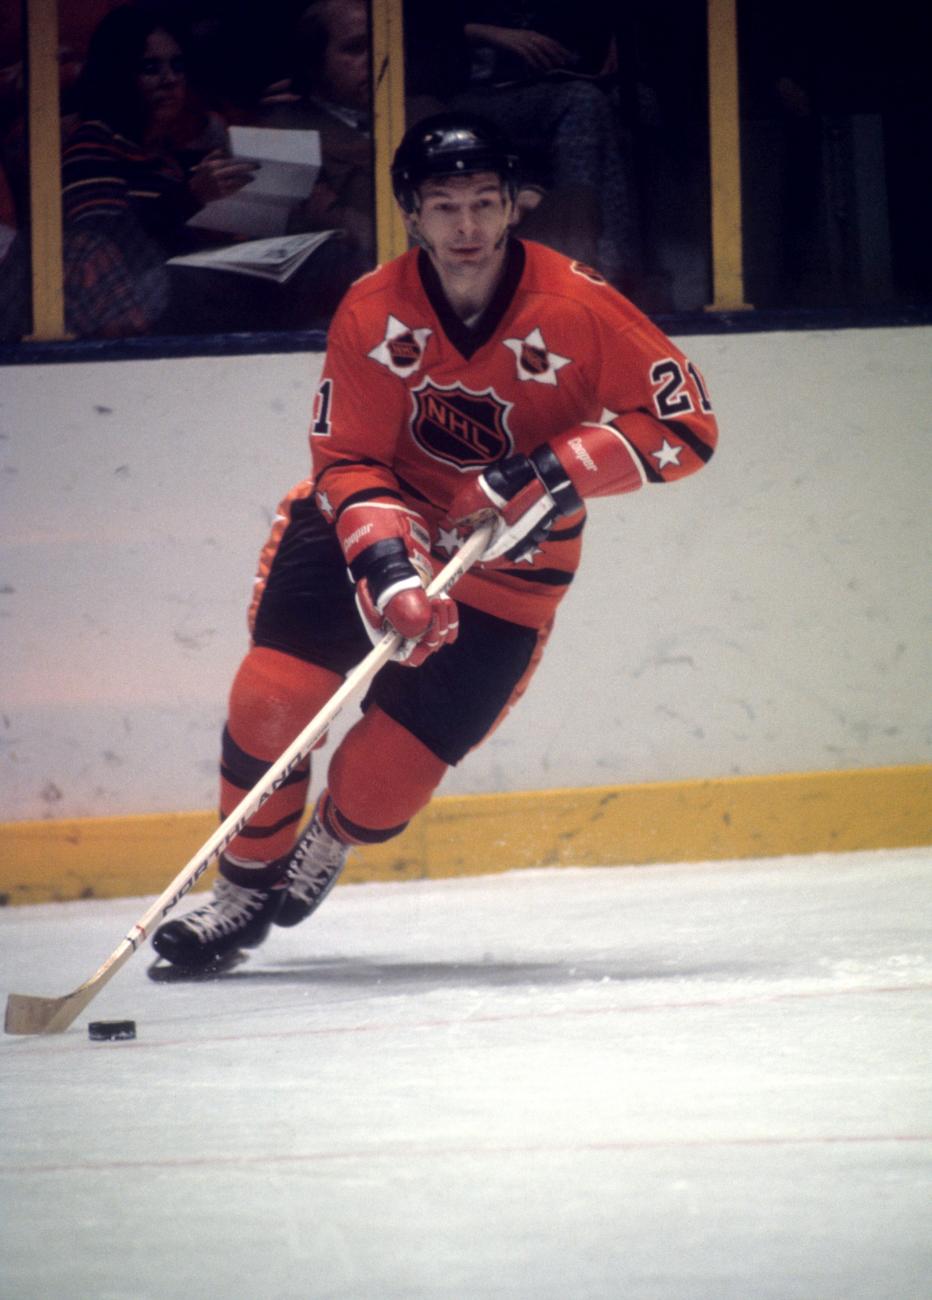 Stan Mikita in red uniform skating holding a hockey stick.